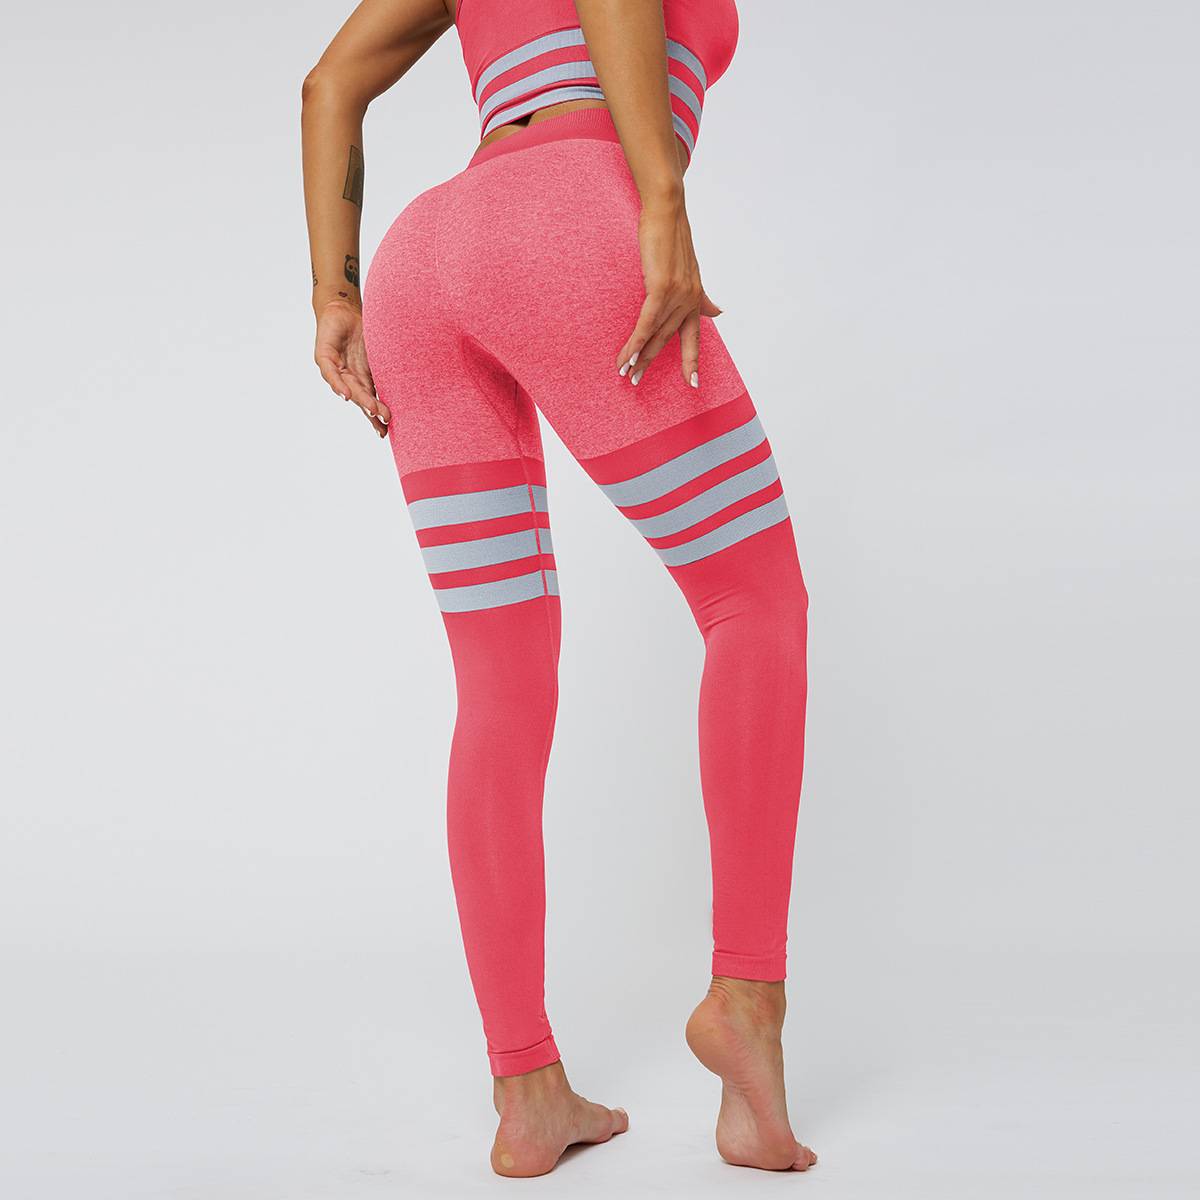 Sexy Peach Hip High Waist Yoga Pants Women39s Knitted Seamless Breathable Striped Yoga Fitness Leggingspicture2